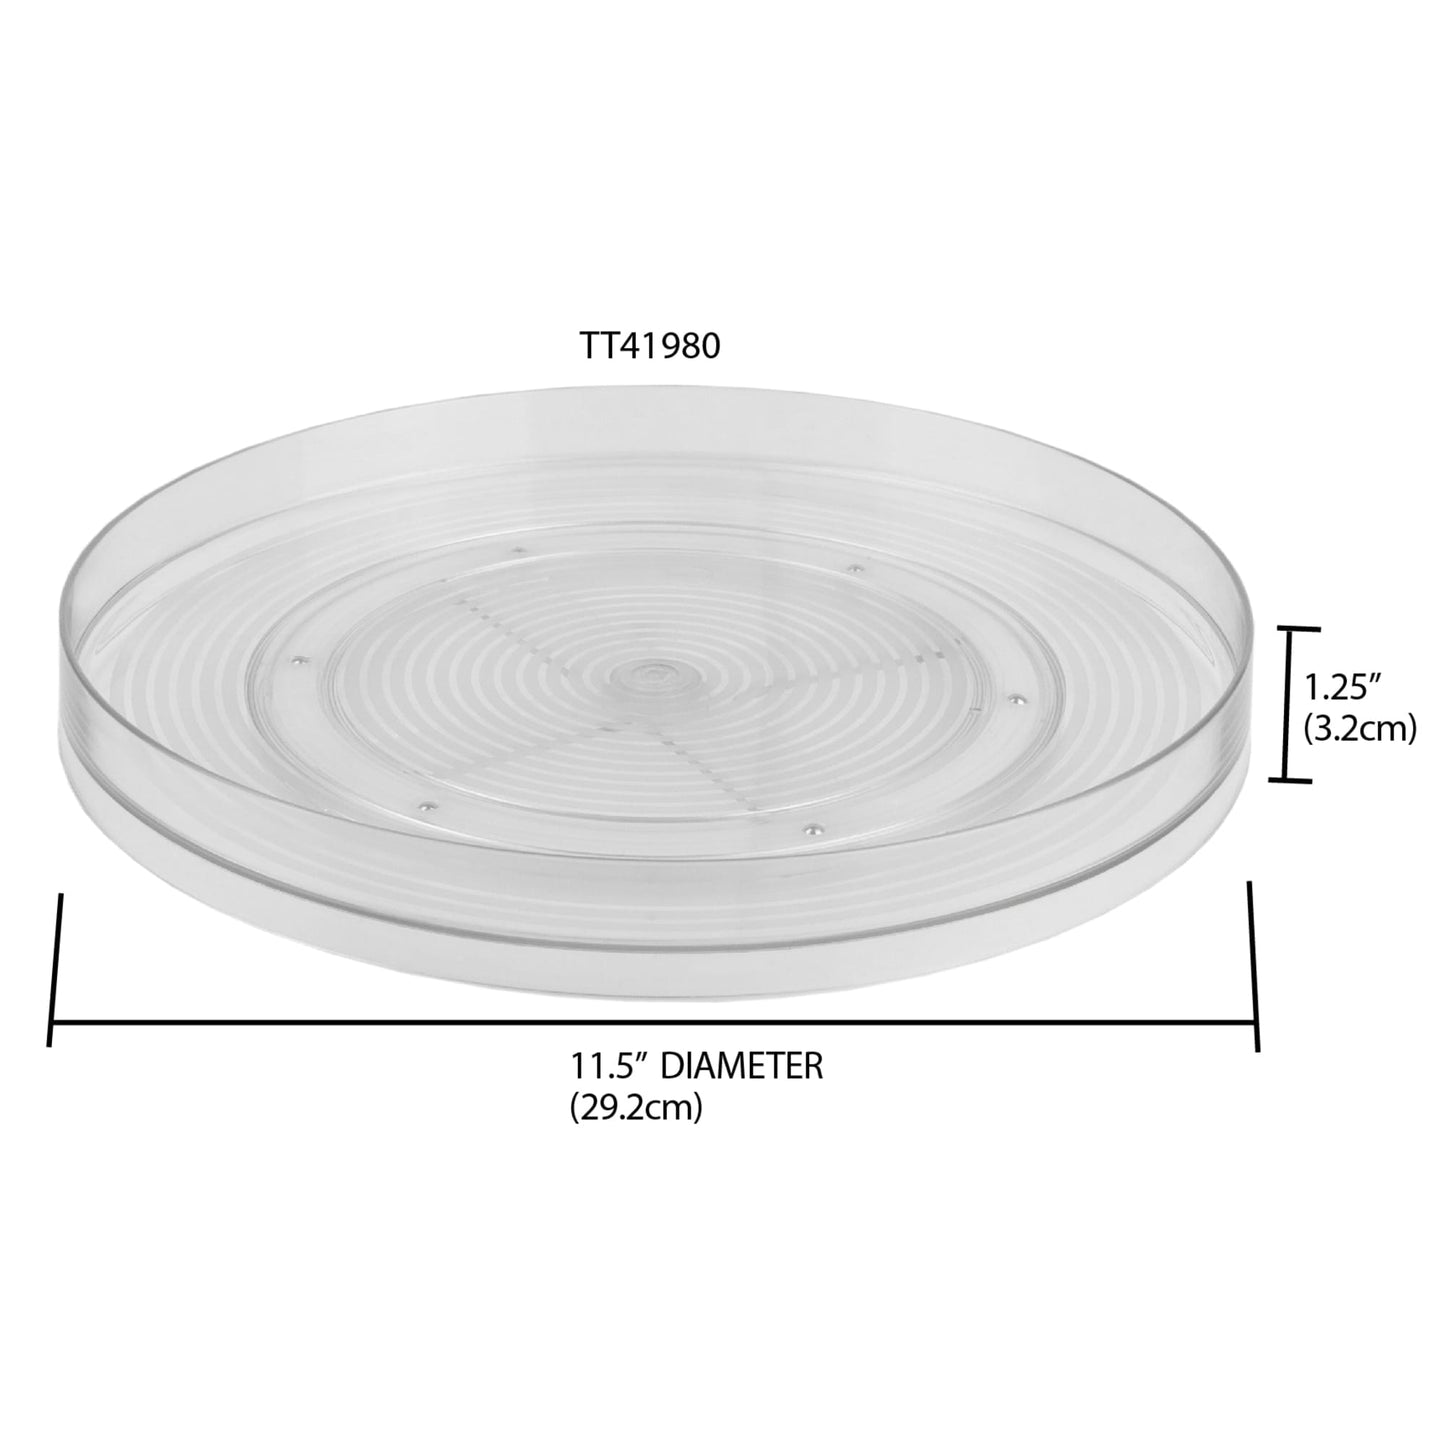 Smooth Spin Non-Skid Plastic Turntable, Clear